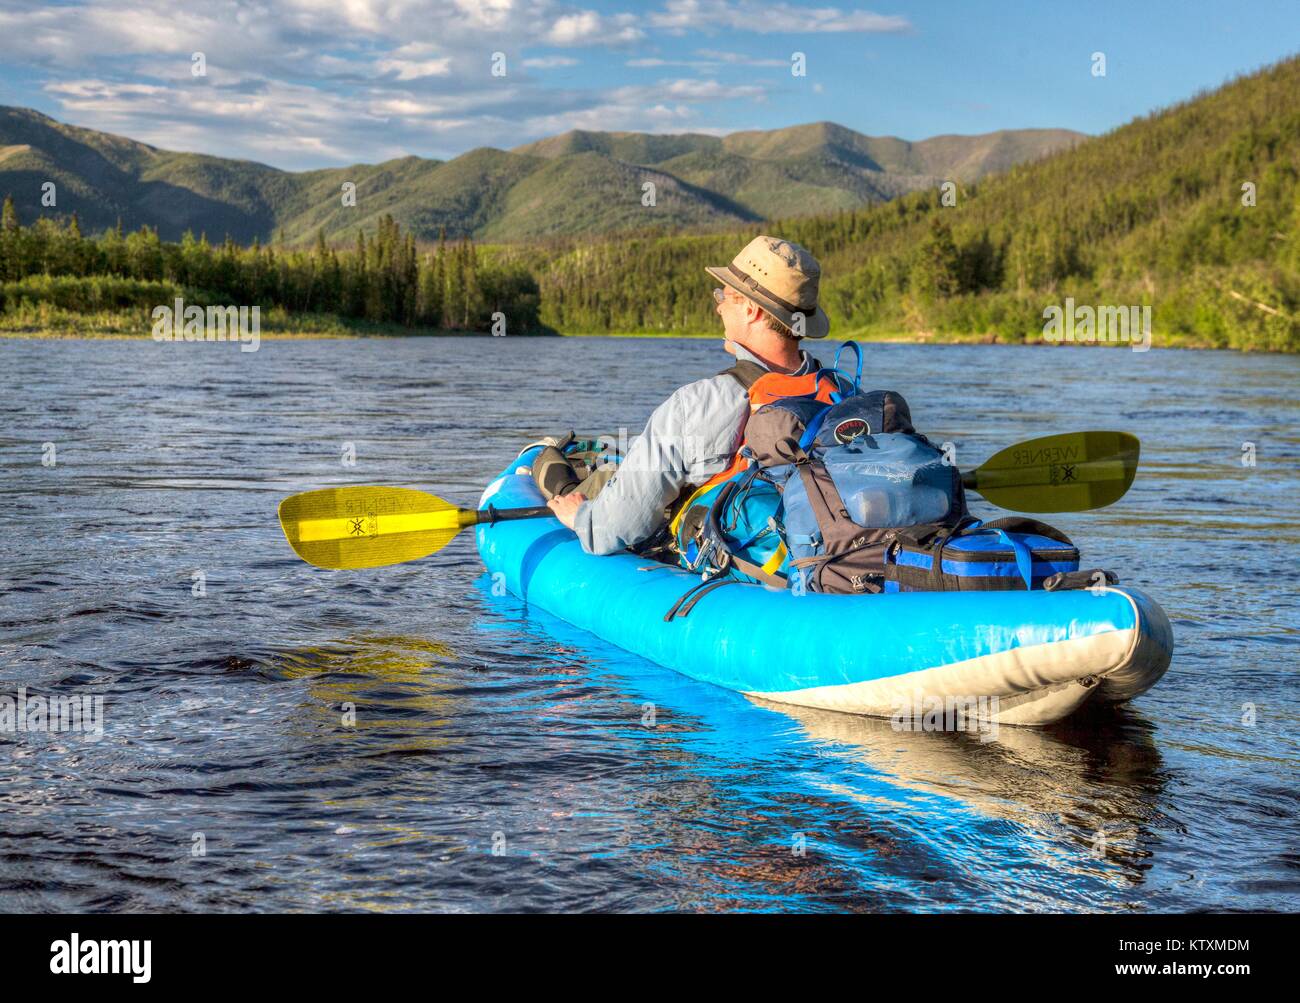 A tourist kayaks down the Beaver Creek Wild and Scenic River June 29, 2014 in Alaska. Stock Photo